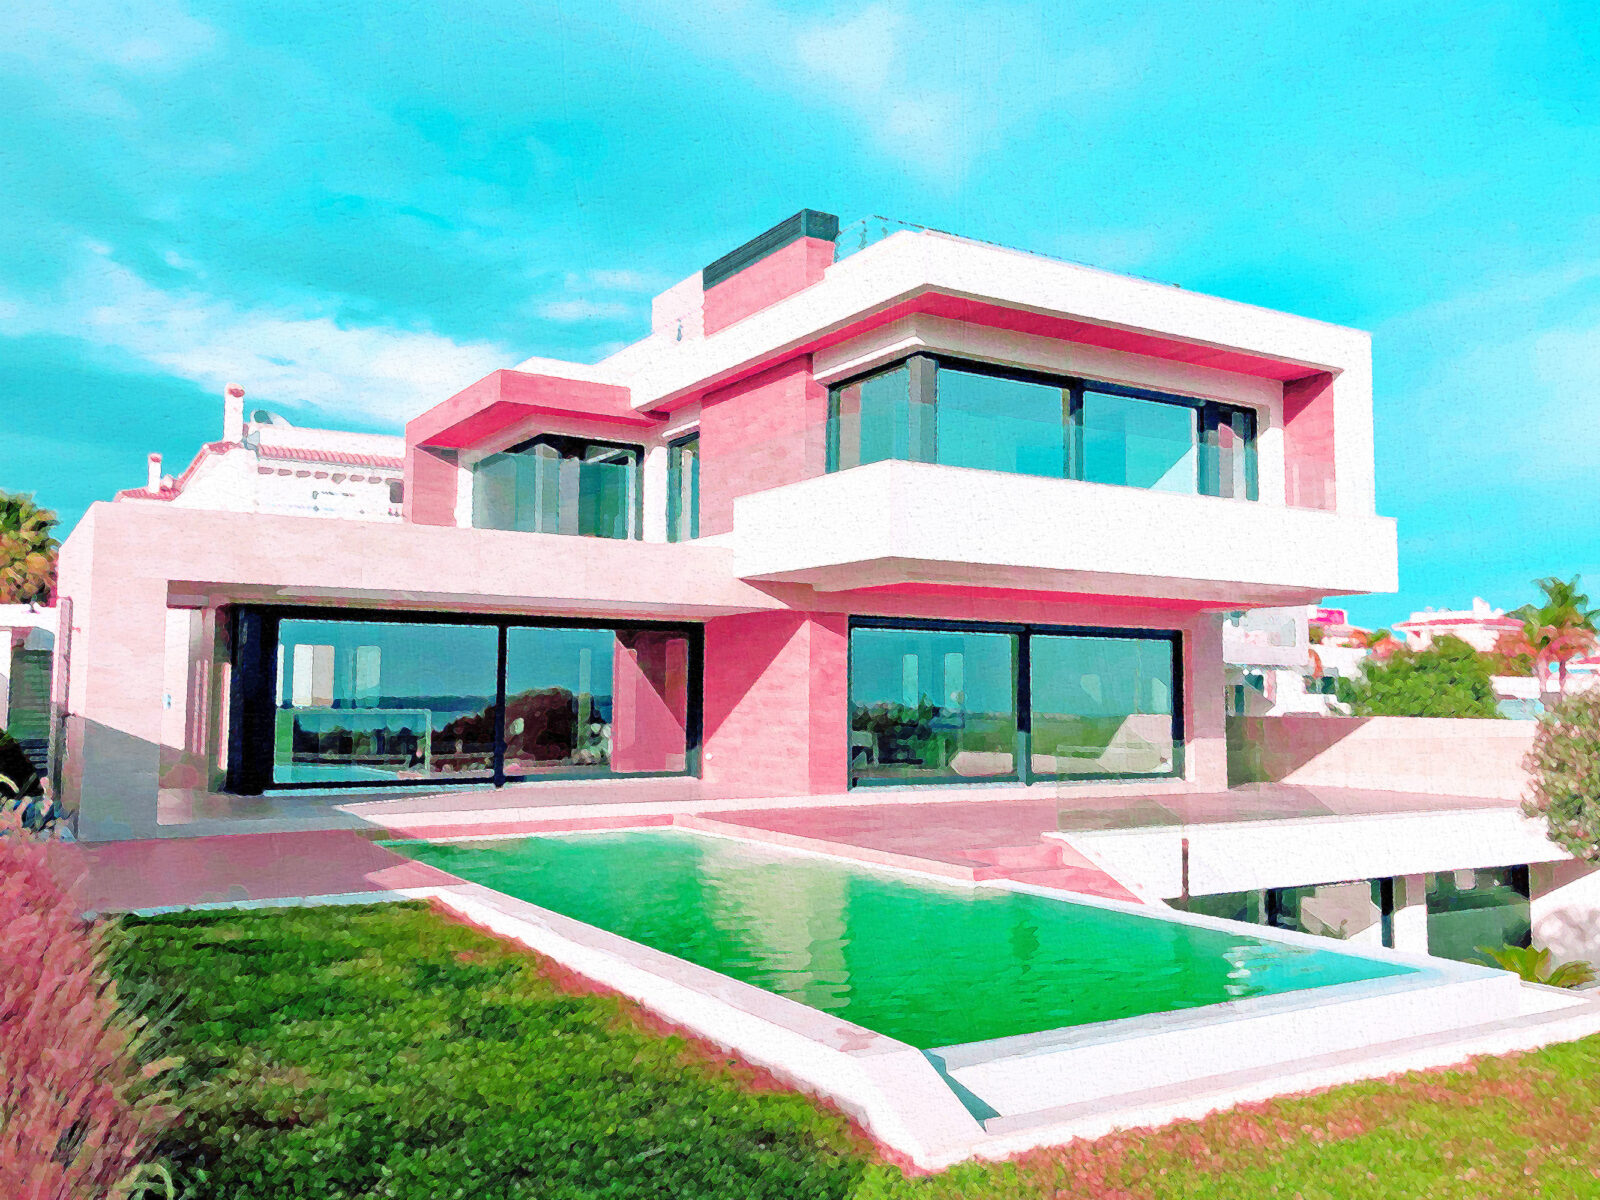 A bright miami-esque painting of a modern architecture home with a pool. The colours are bright, sun-bathed. The house is shades of pink, the water in the pool a clear green, and the sky a vibrant blue. It is a summer day that one wishes one could just dive into.